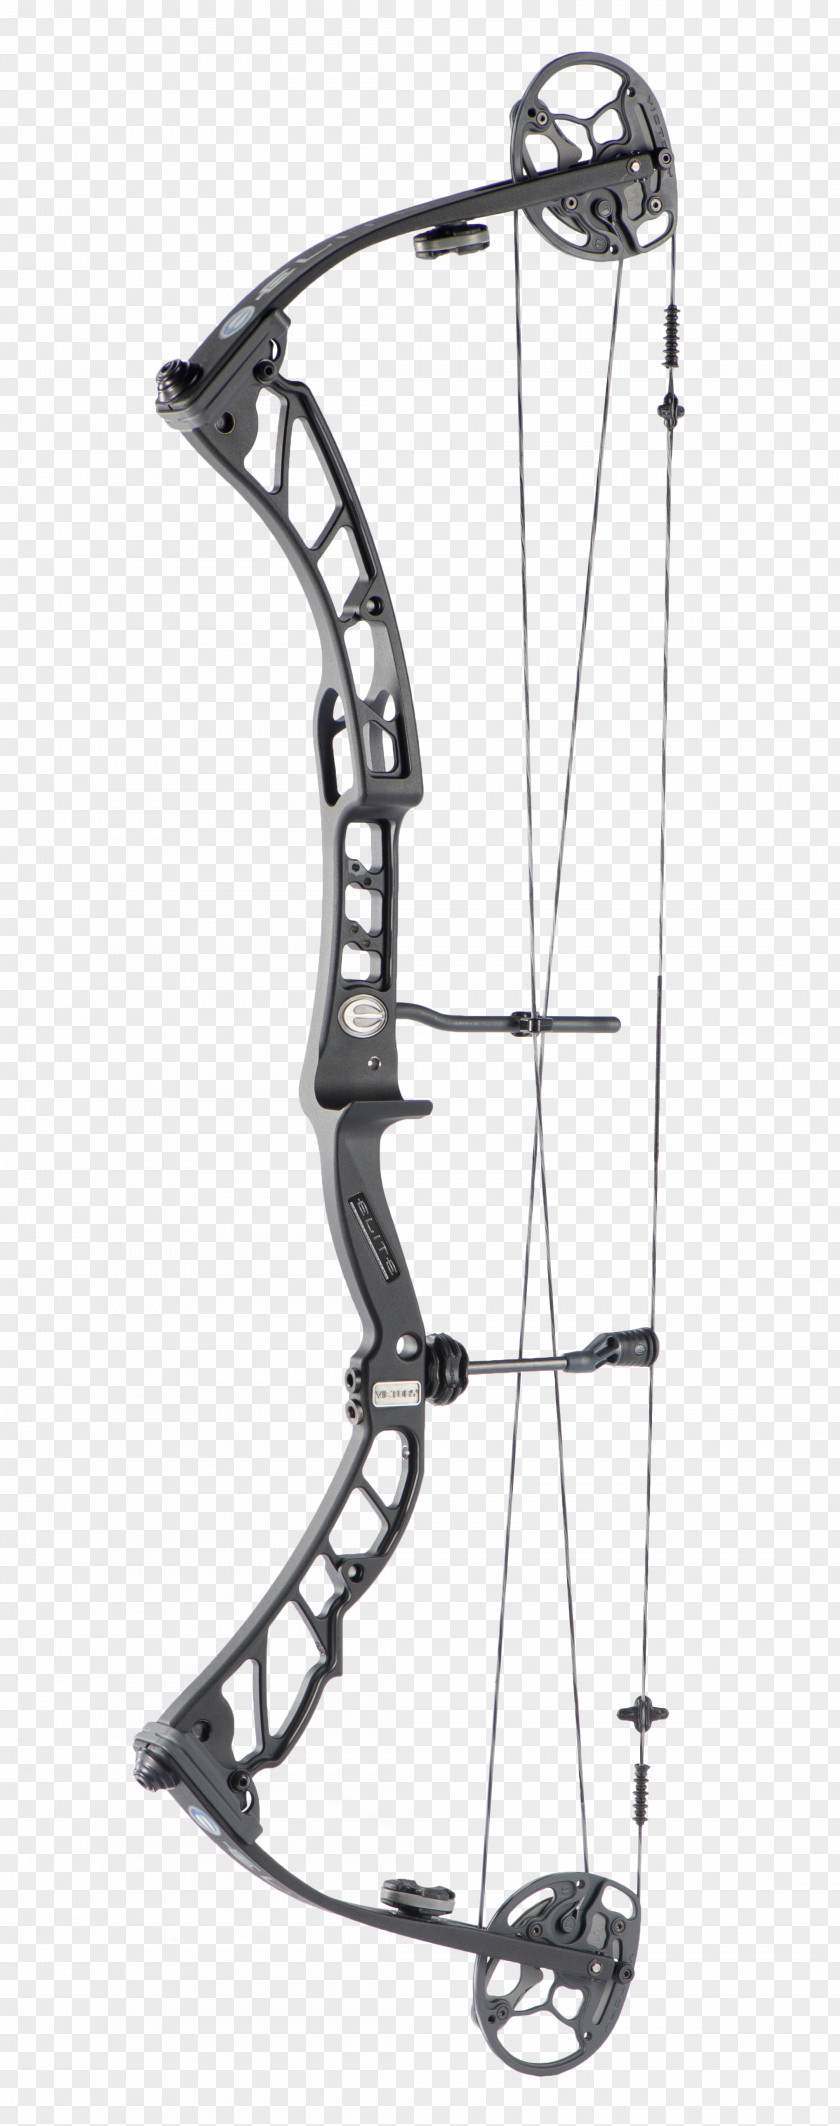 Archery Cover Compound Bows Bow And Arrow Bowhunting PNG